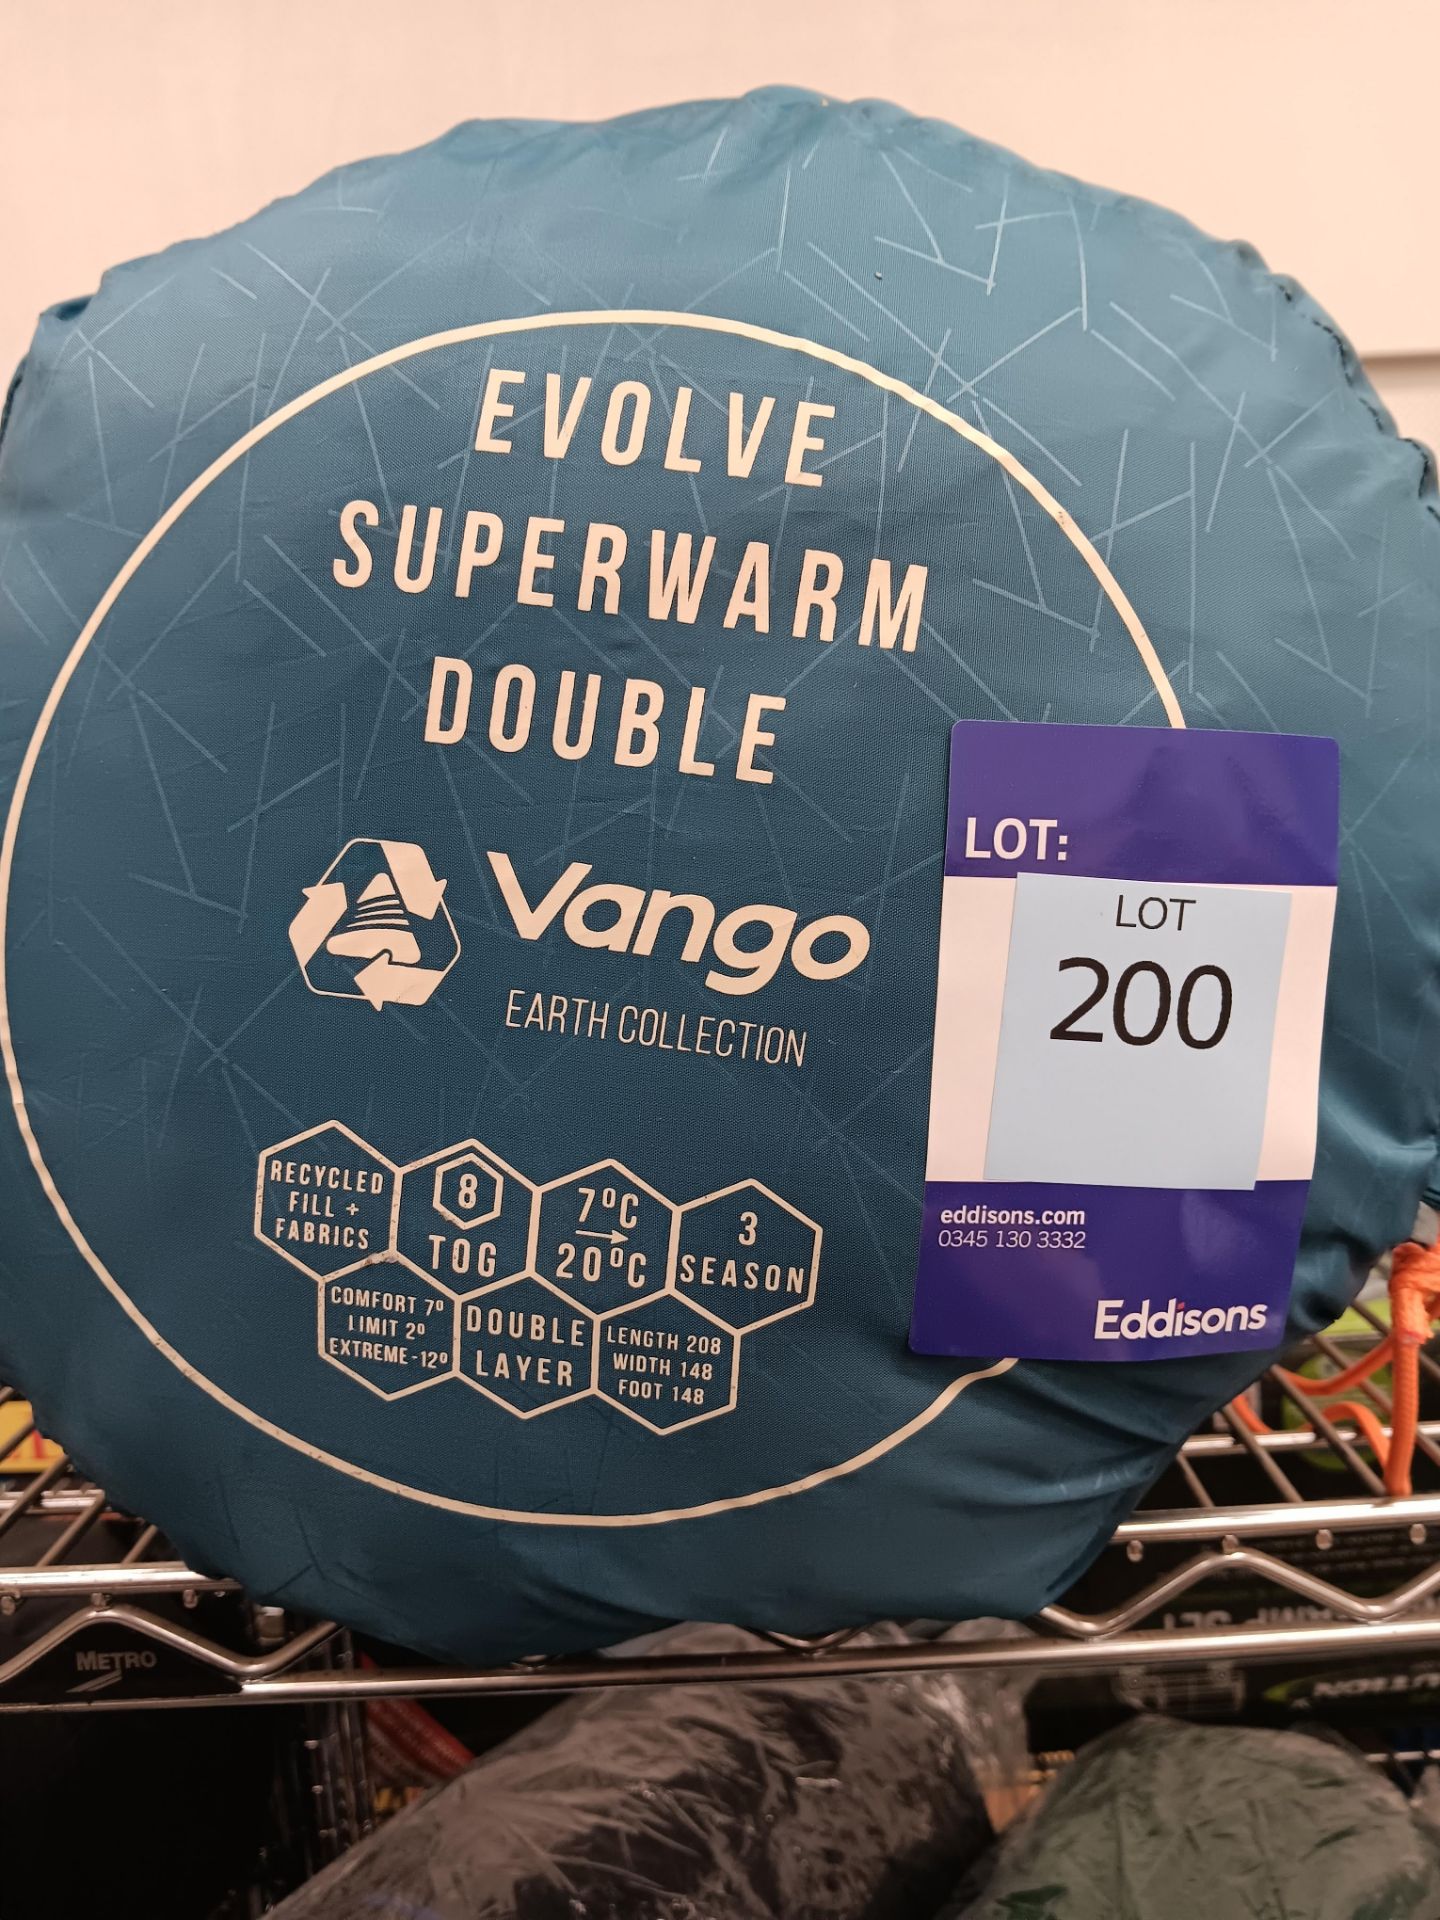 Vango Evolve Superwarm Double Sleeping Bag (Please note, Viewing Strongly Recommended - Eddisons